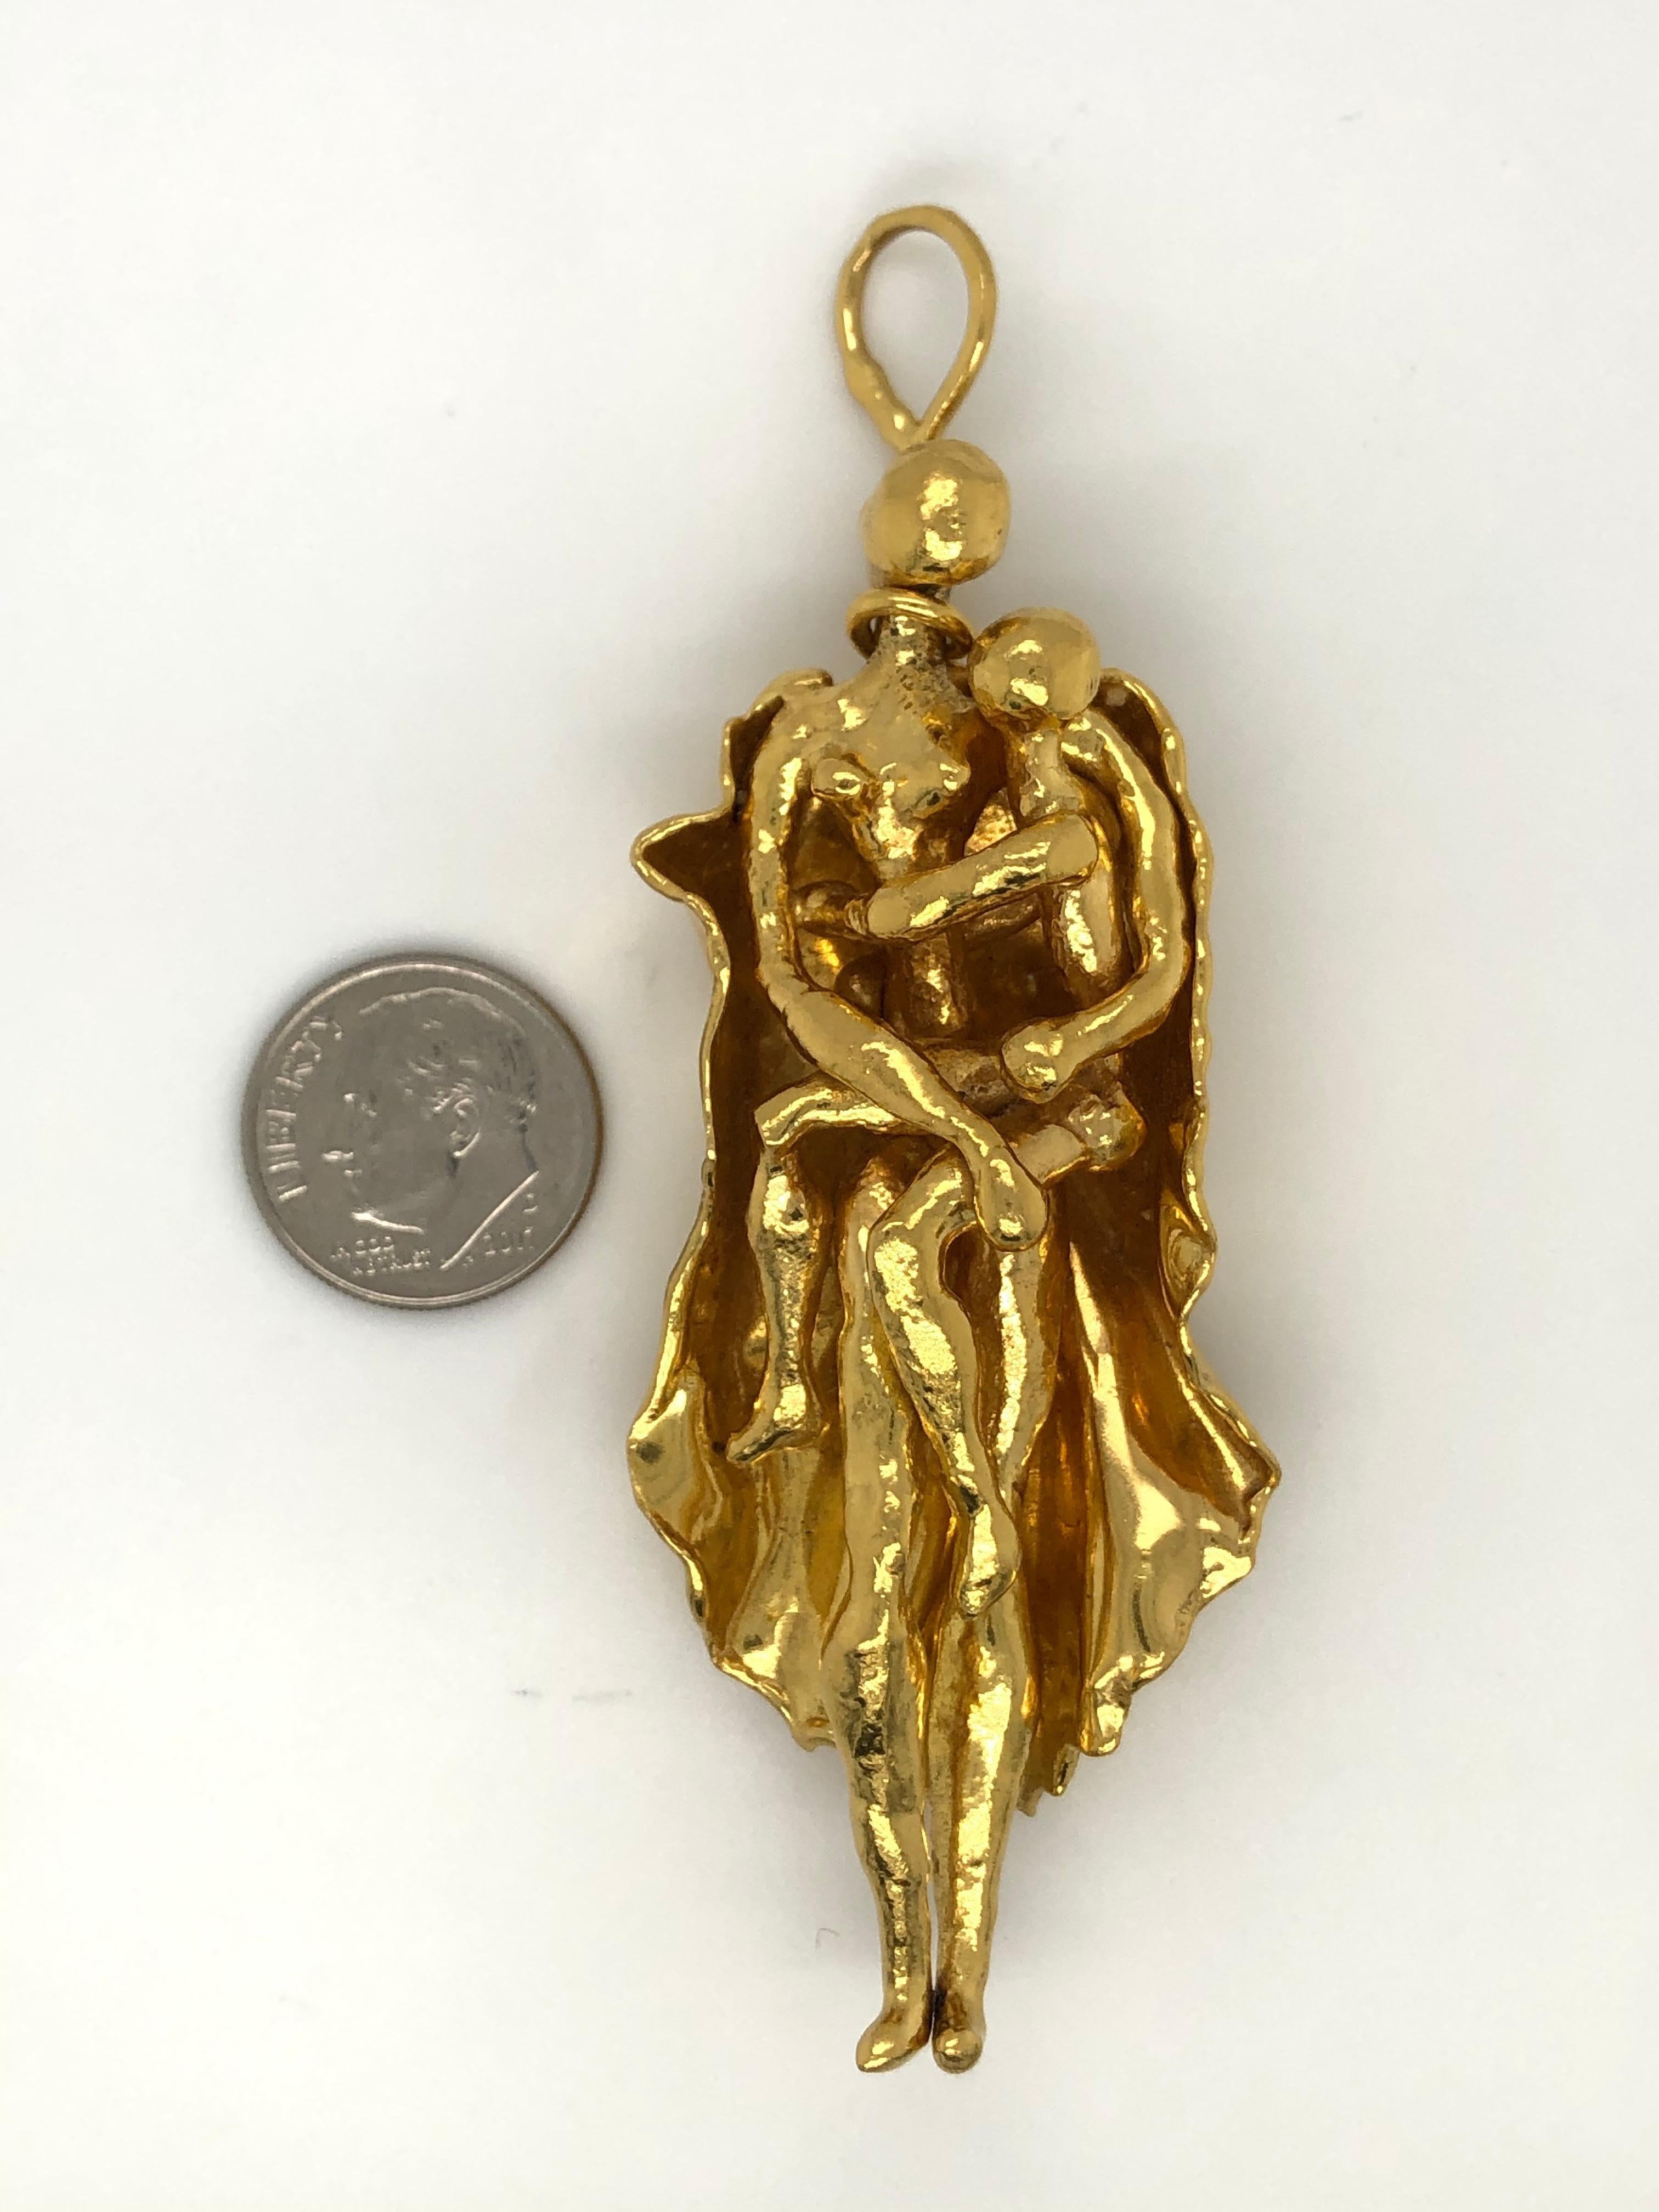 Jean Mahie Mother and Child Pendant in 22k gold. Stamped 22k JM. Chain in picture not included.